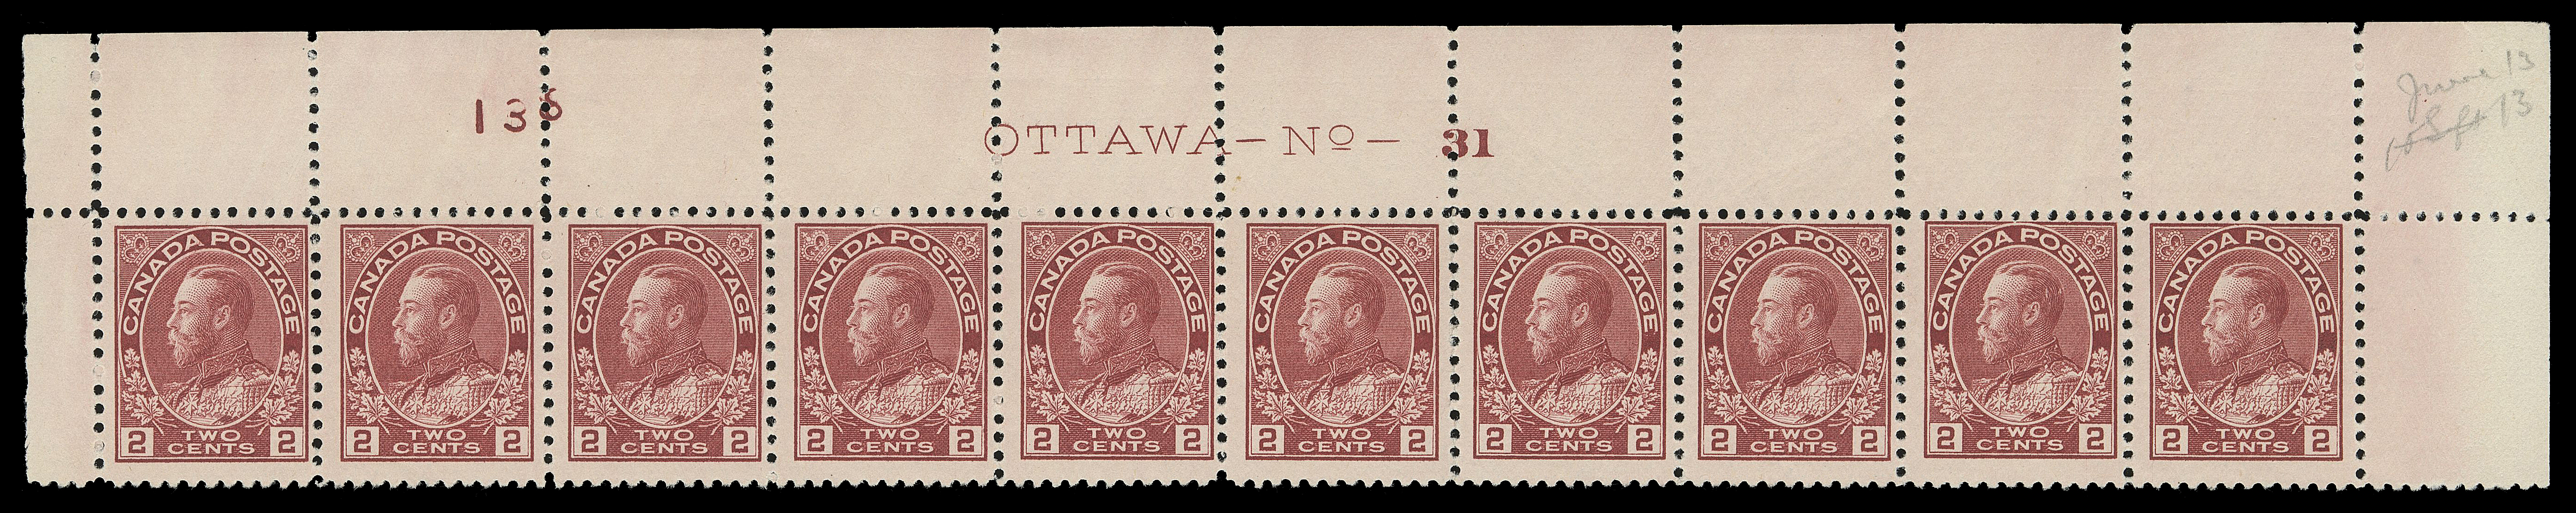 ADMIRAL STAMPS  106ii,Two plate strips of ten - UL Plate 30 and UR Plate 31, both with printing order number "138", LH in selvedge leaving all stamps NH, F-VF (Unitrade cat. $1,050)